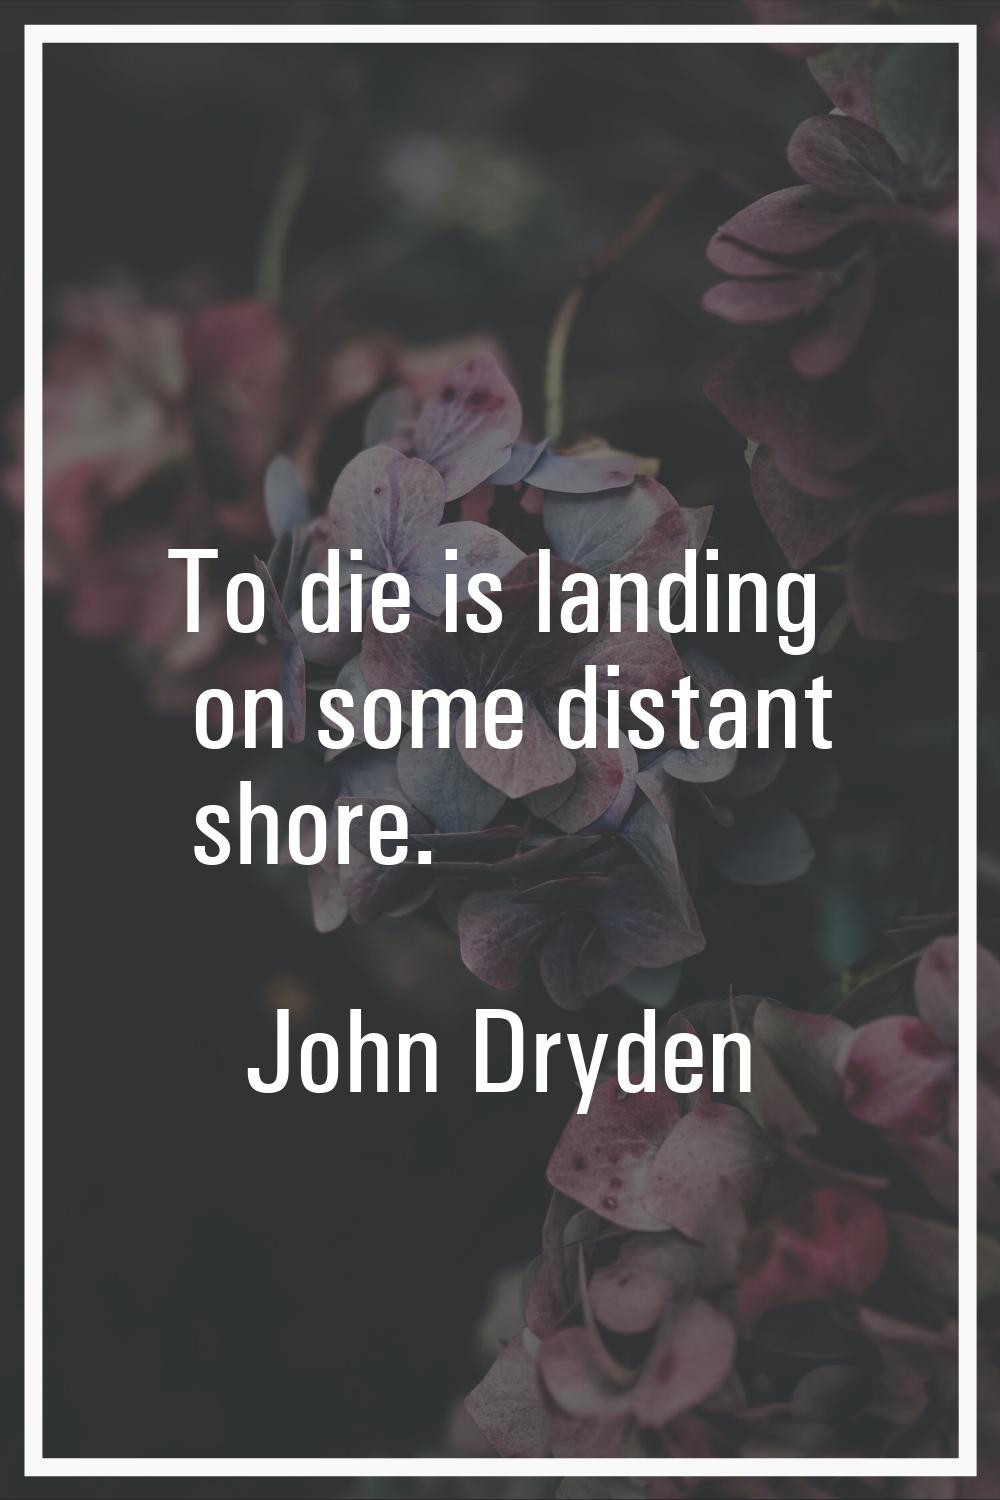 To die is landing on some distant shore.